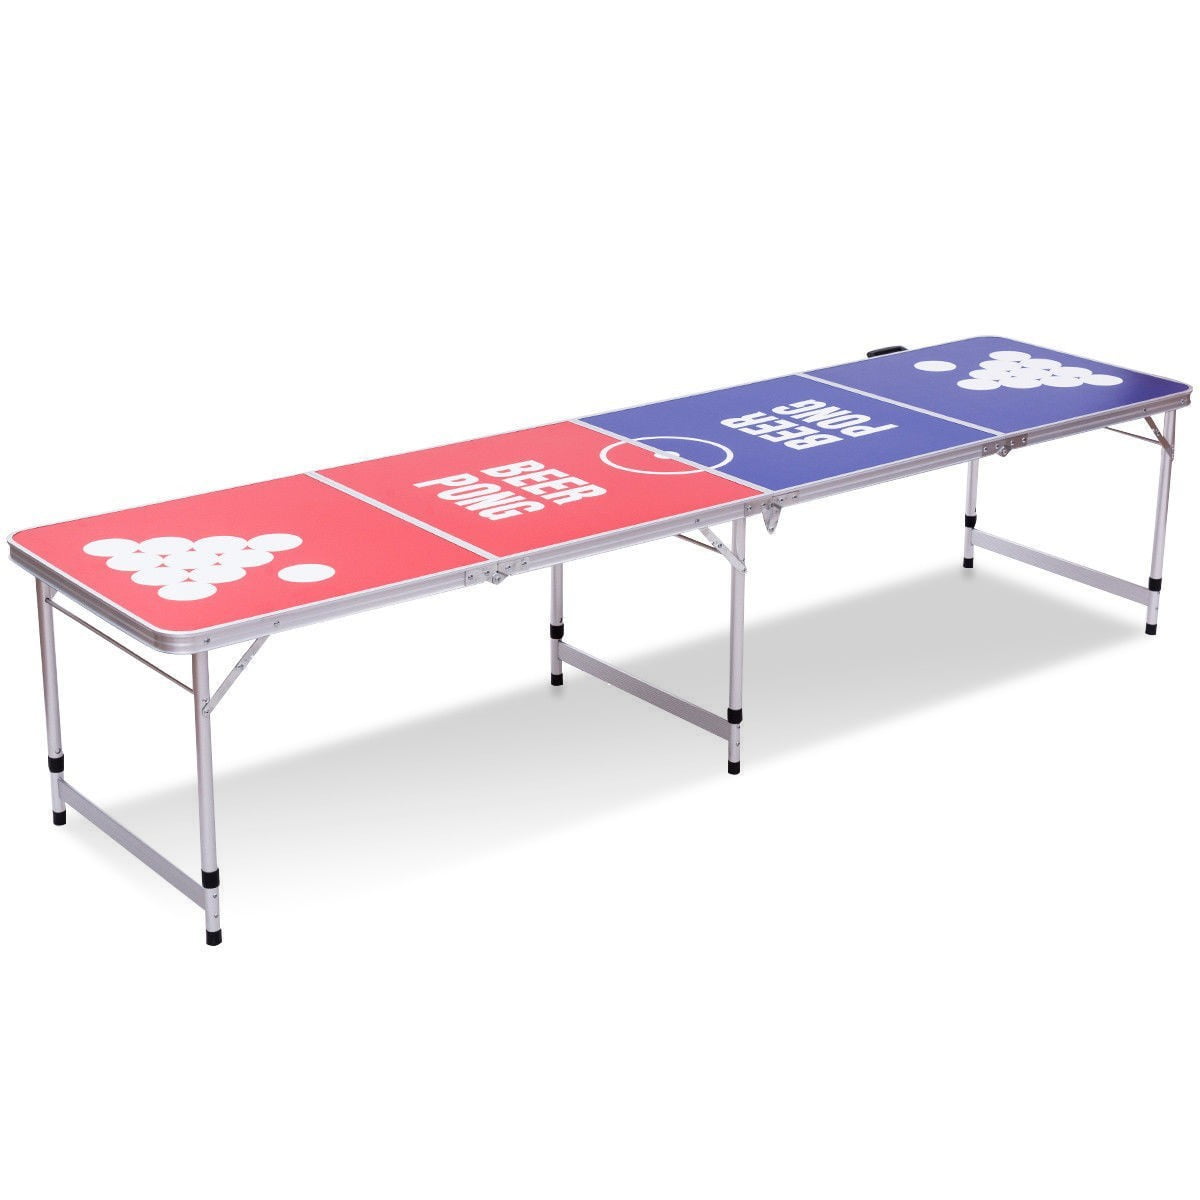 NEW 3 Foot Aluminum Outdoor/Indoor Portable Camping Folding Beer Ping Pong Table 